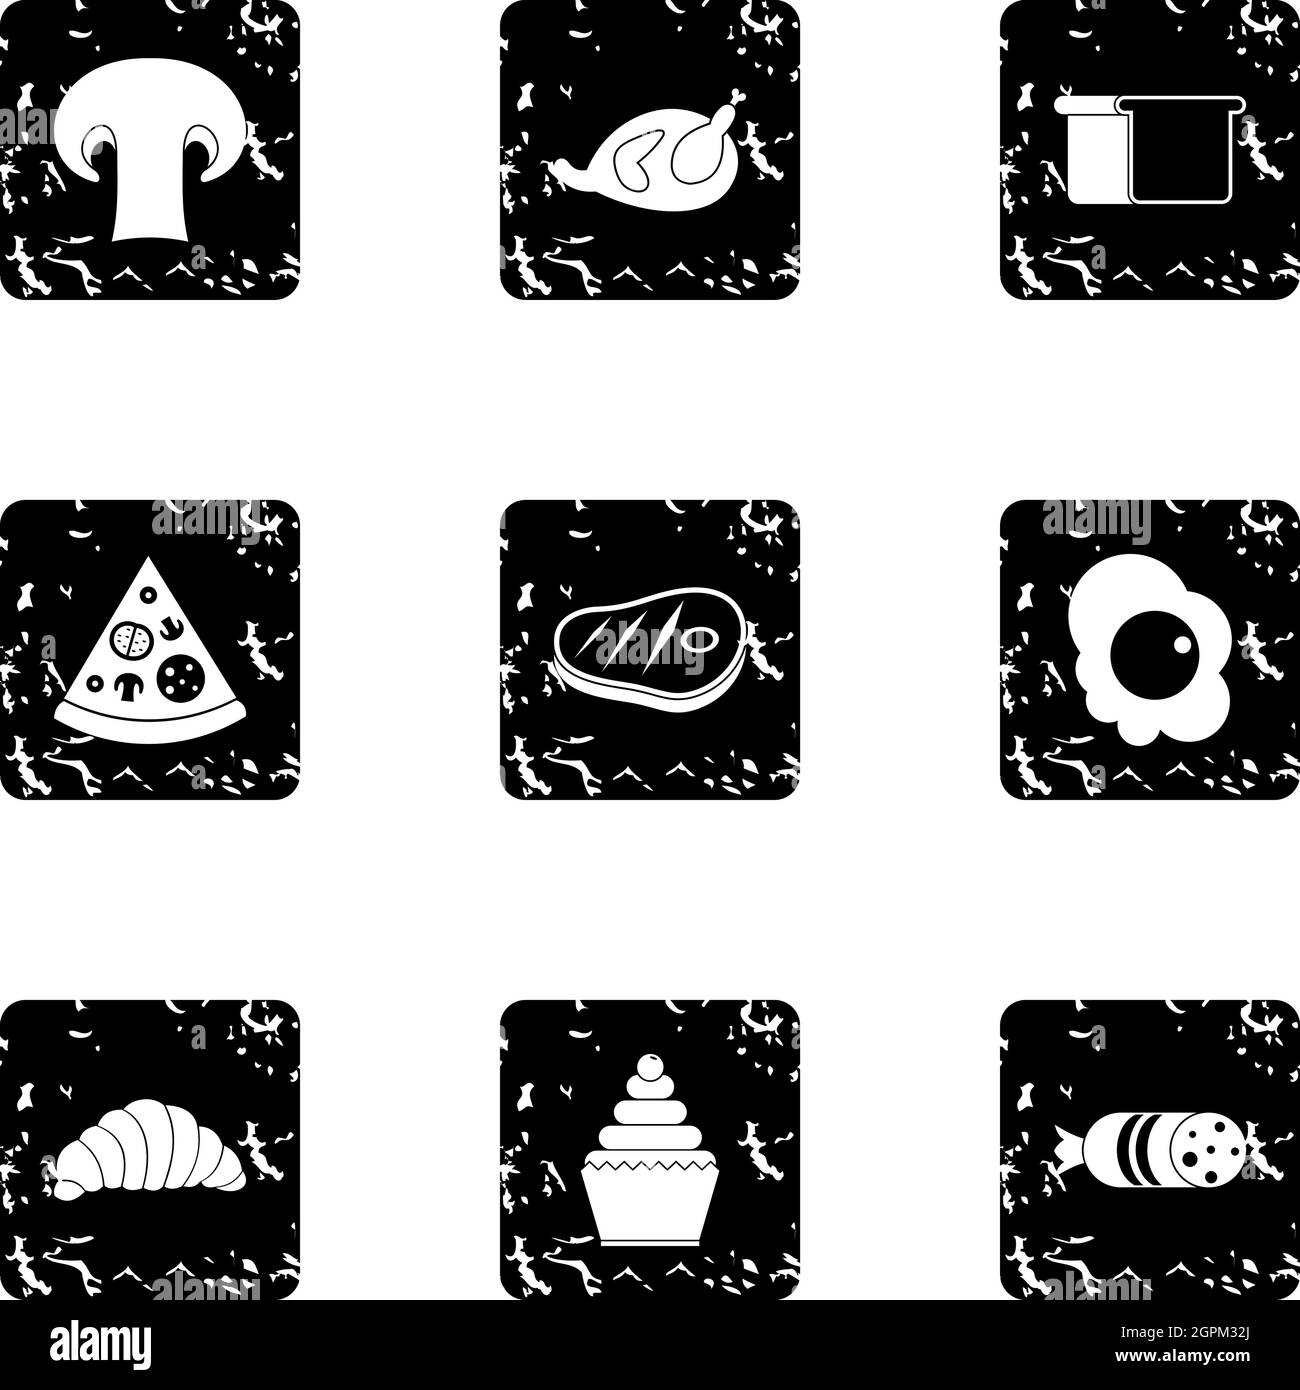 Morning meal icons set, grunge style Stock Vector